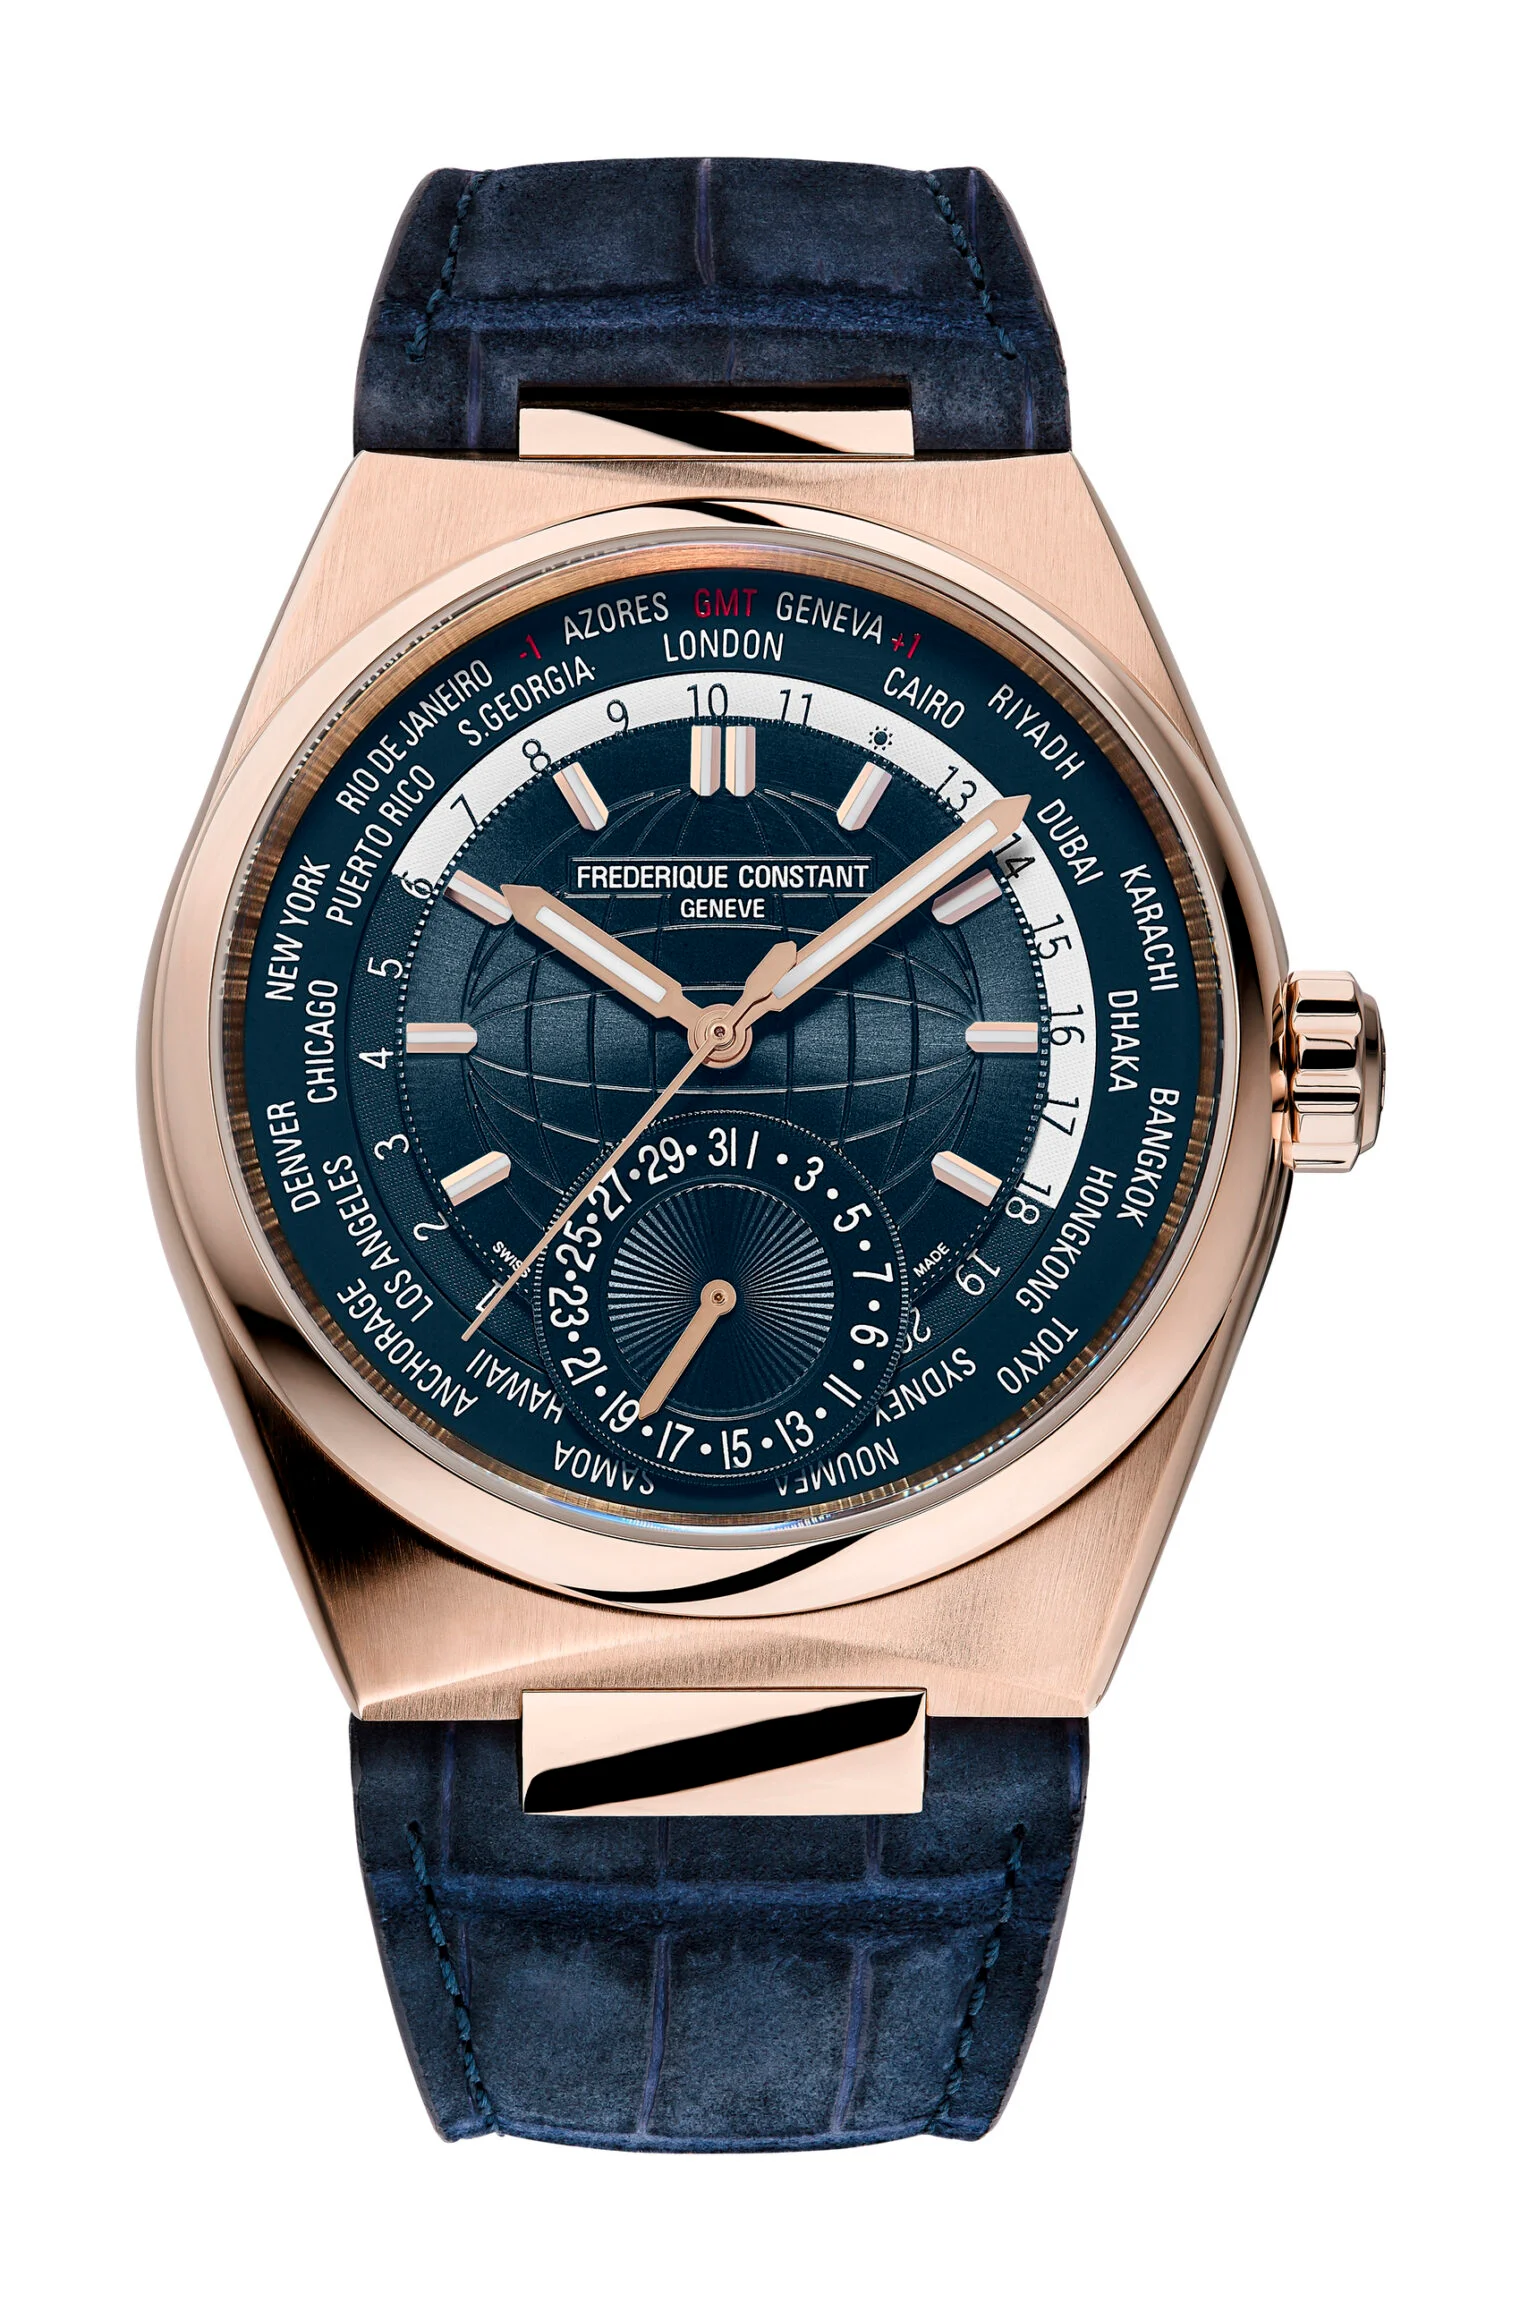 Frederique Constant Highlife World Timer watch